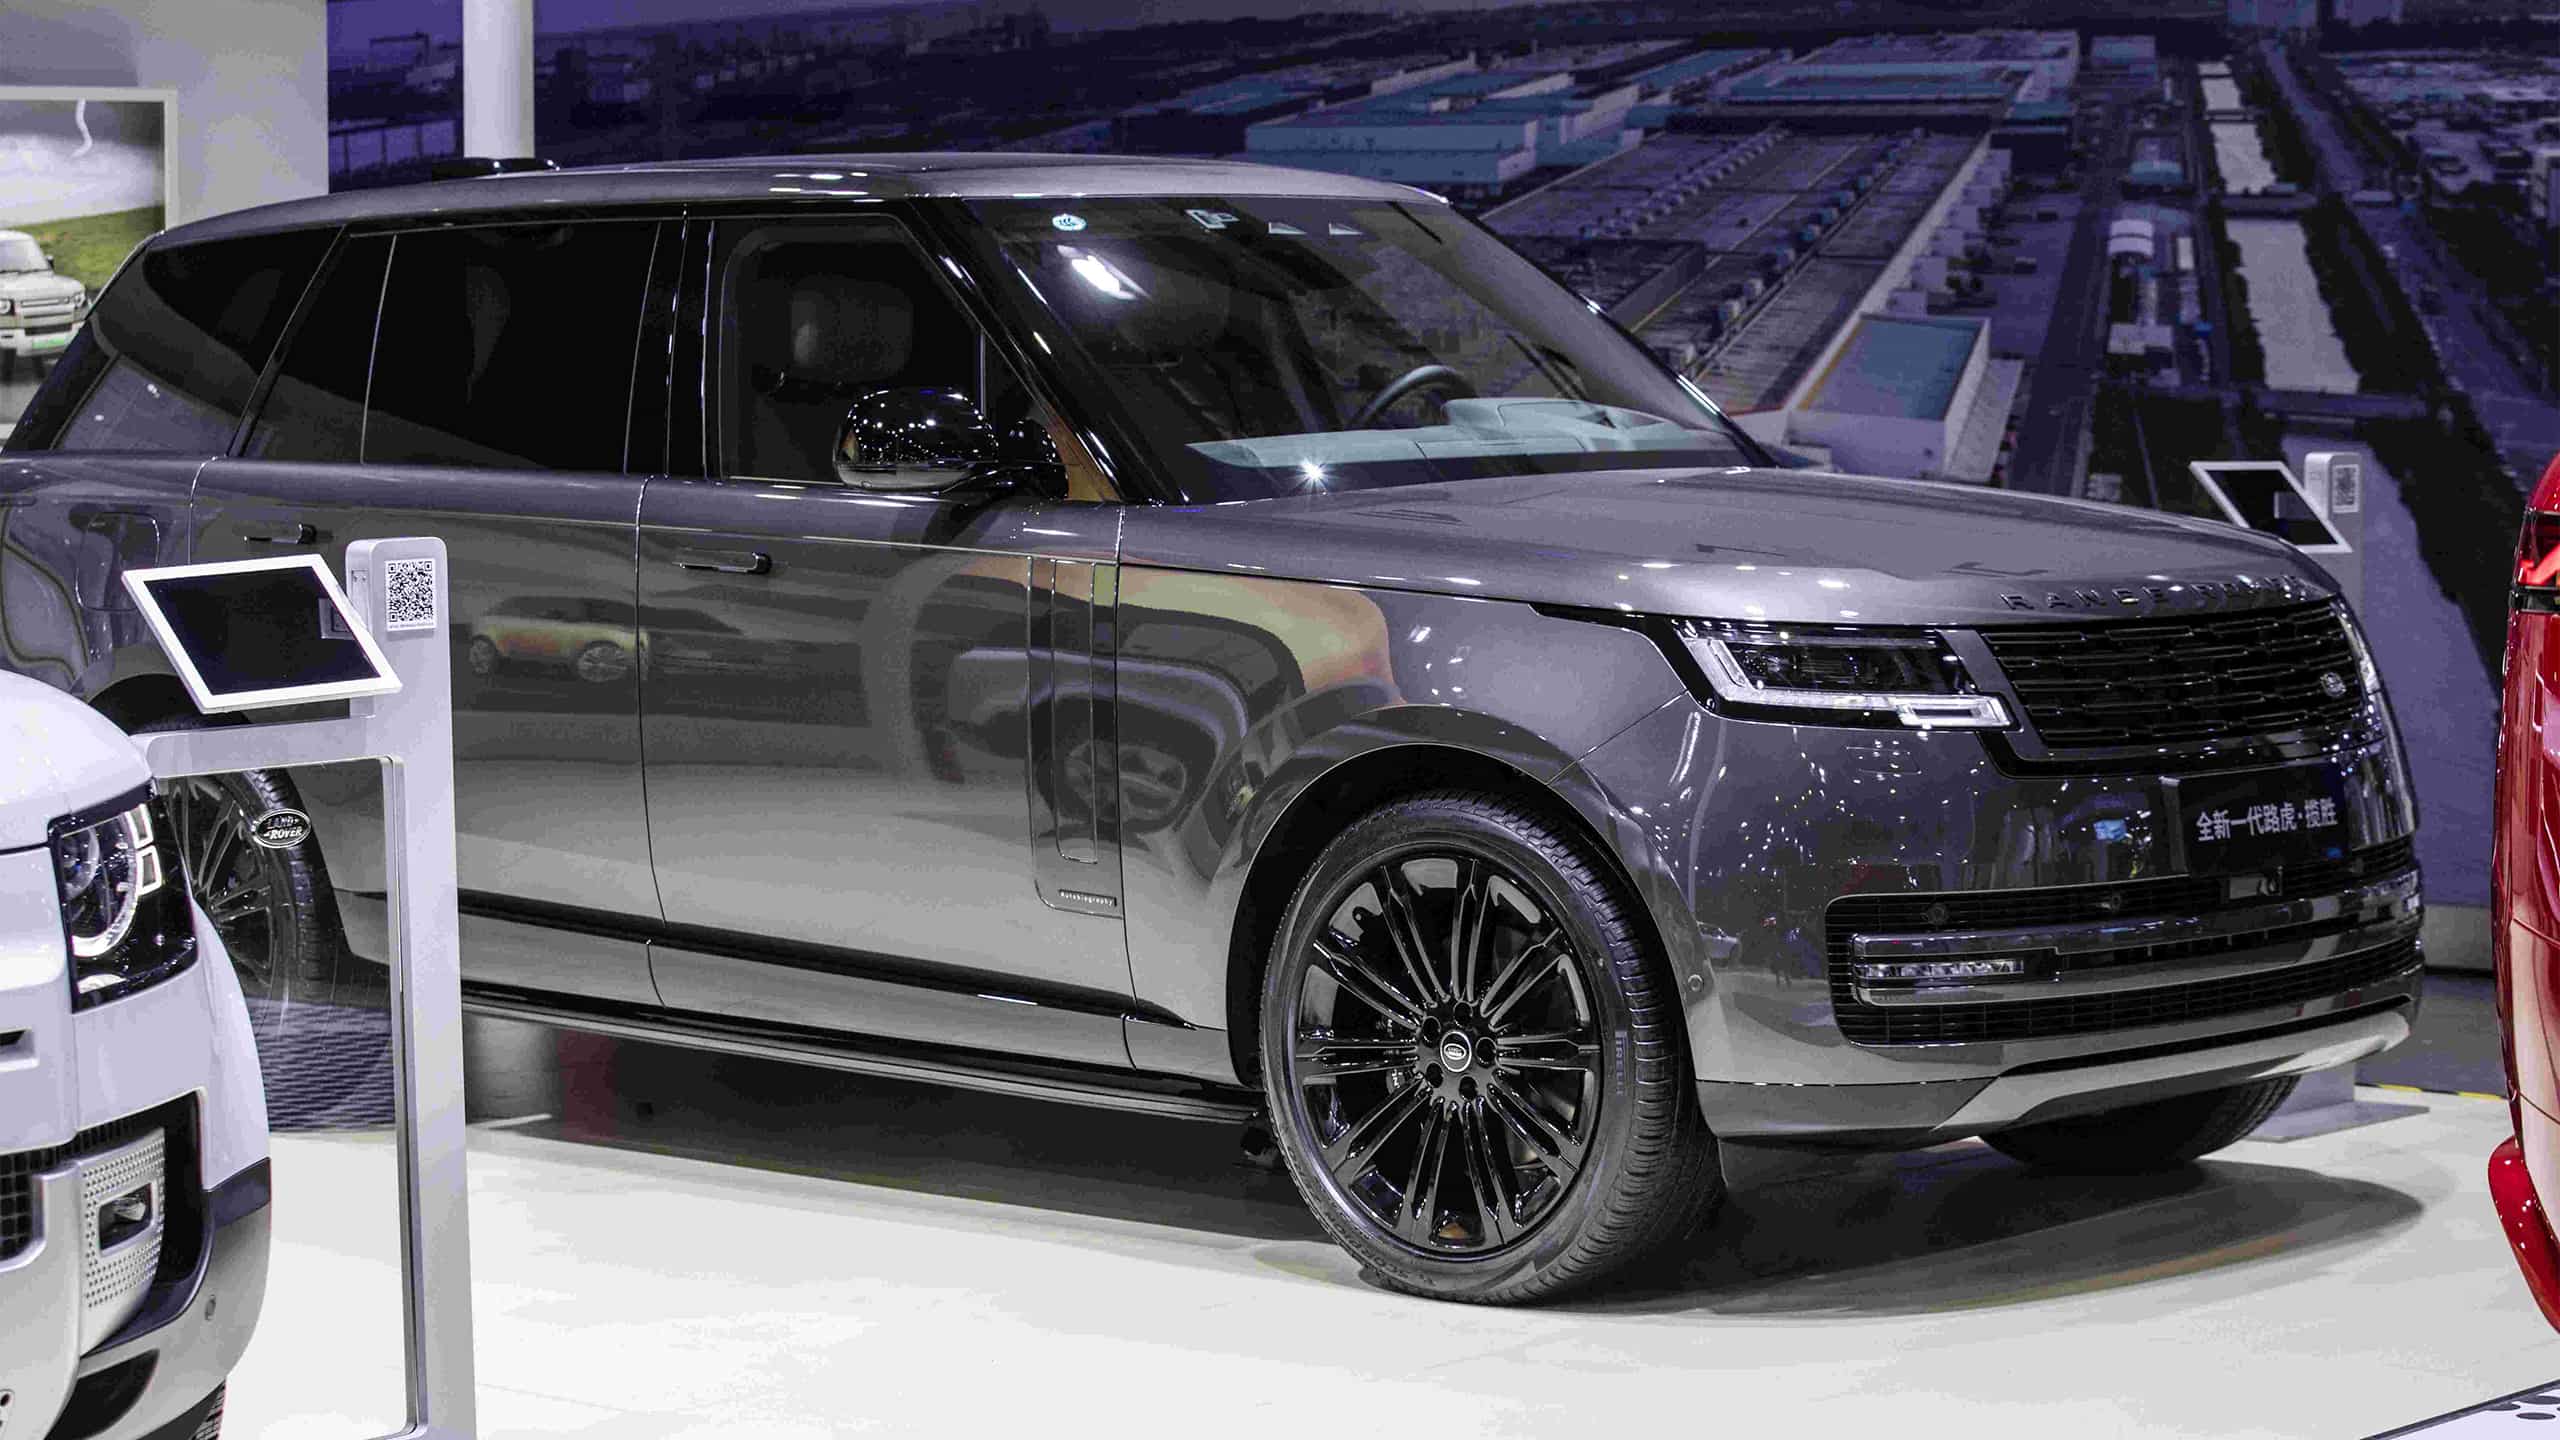 New Generation Range Rover in the Auto Expo